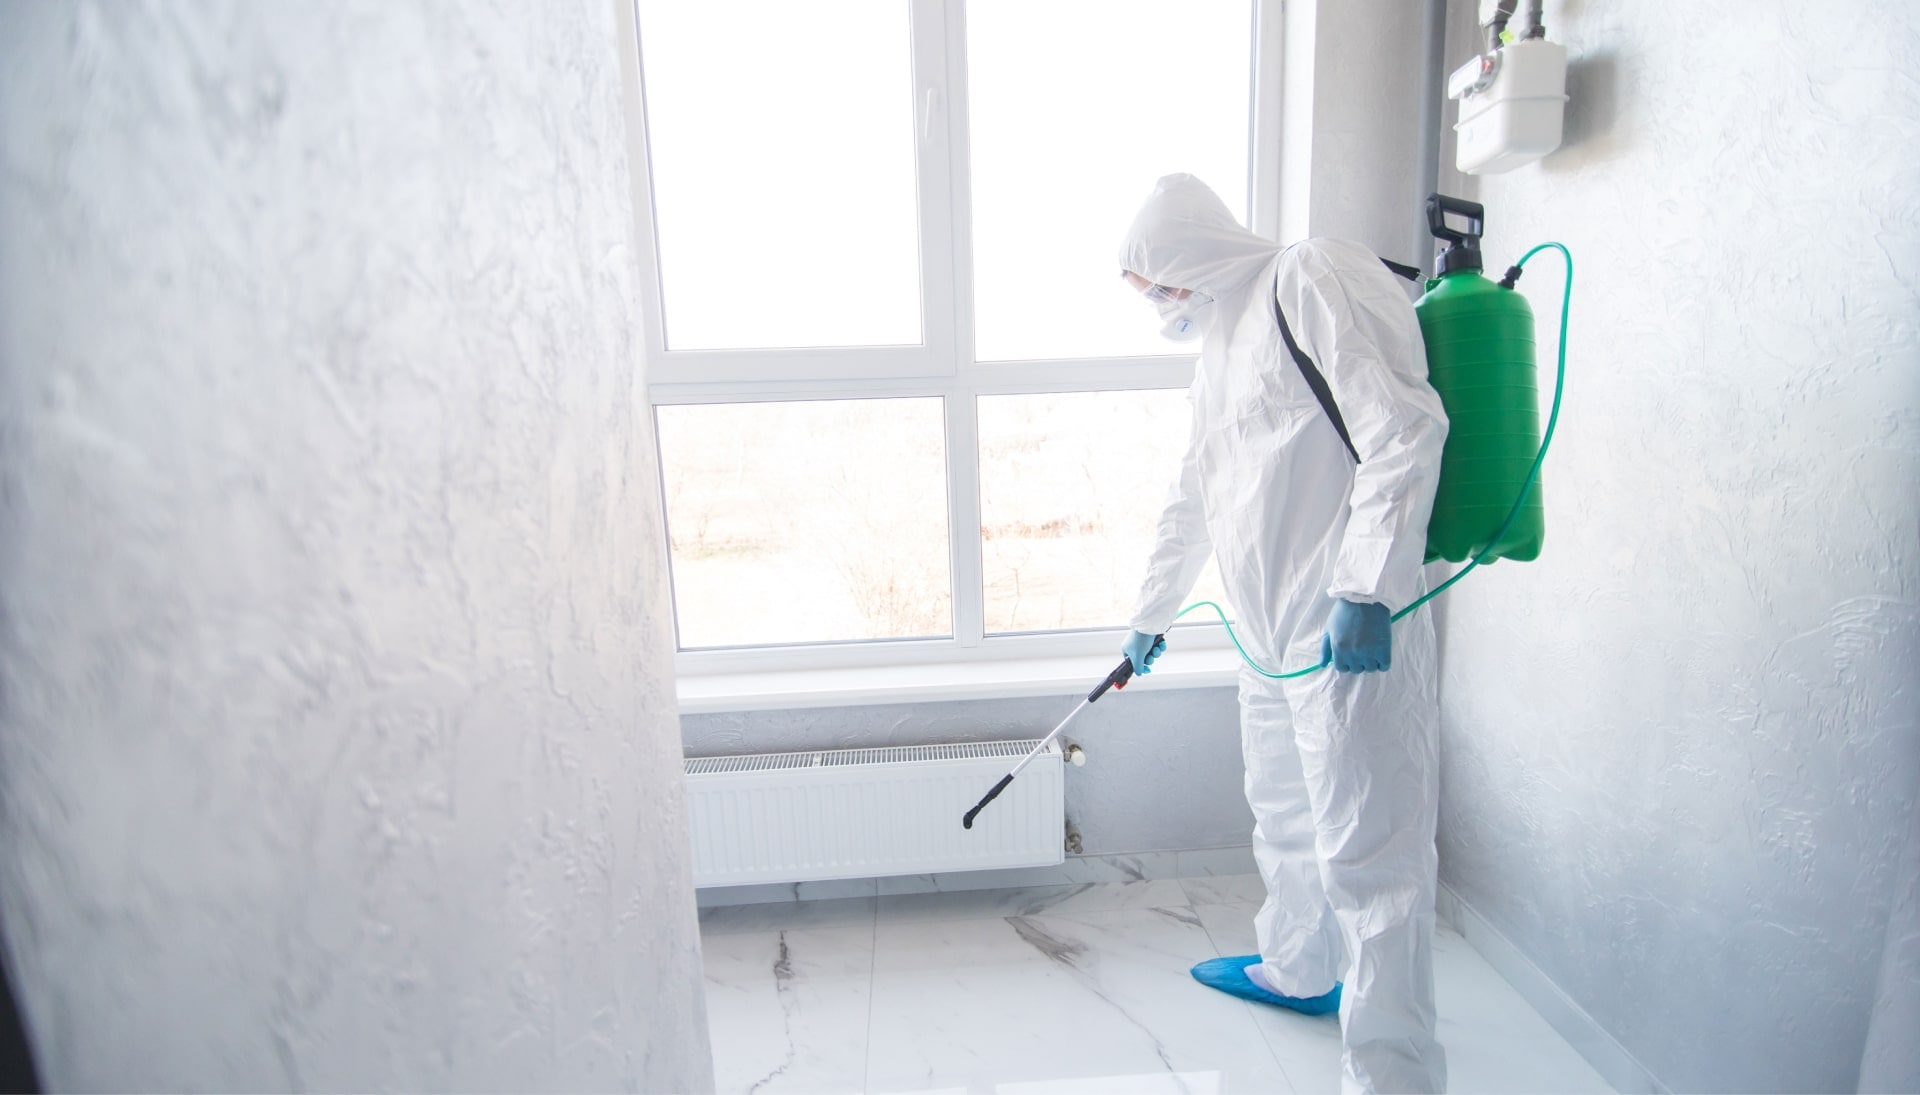 We provide the highest-quality mold inspection, testing, and removal services in the Las Vegas, Nevada area.